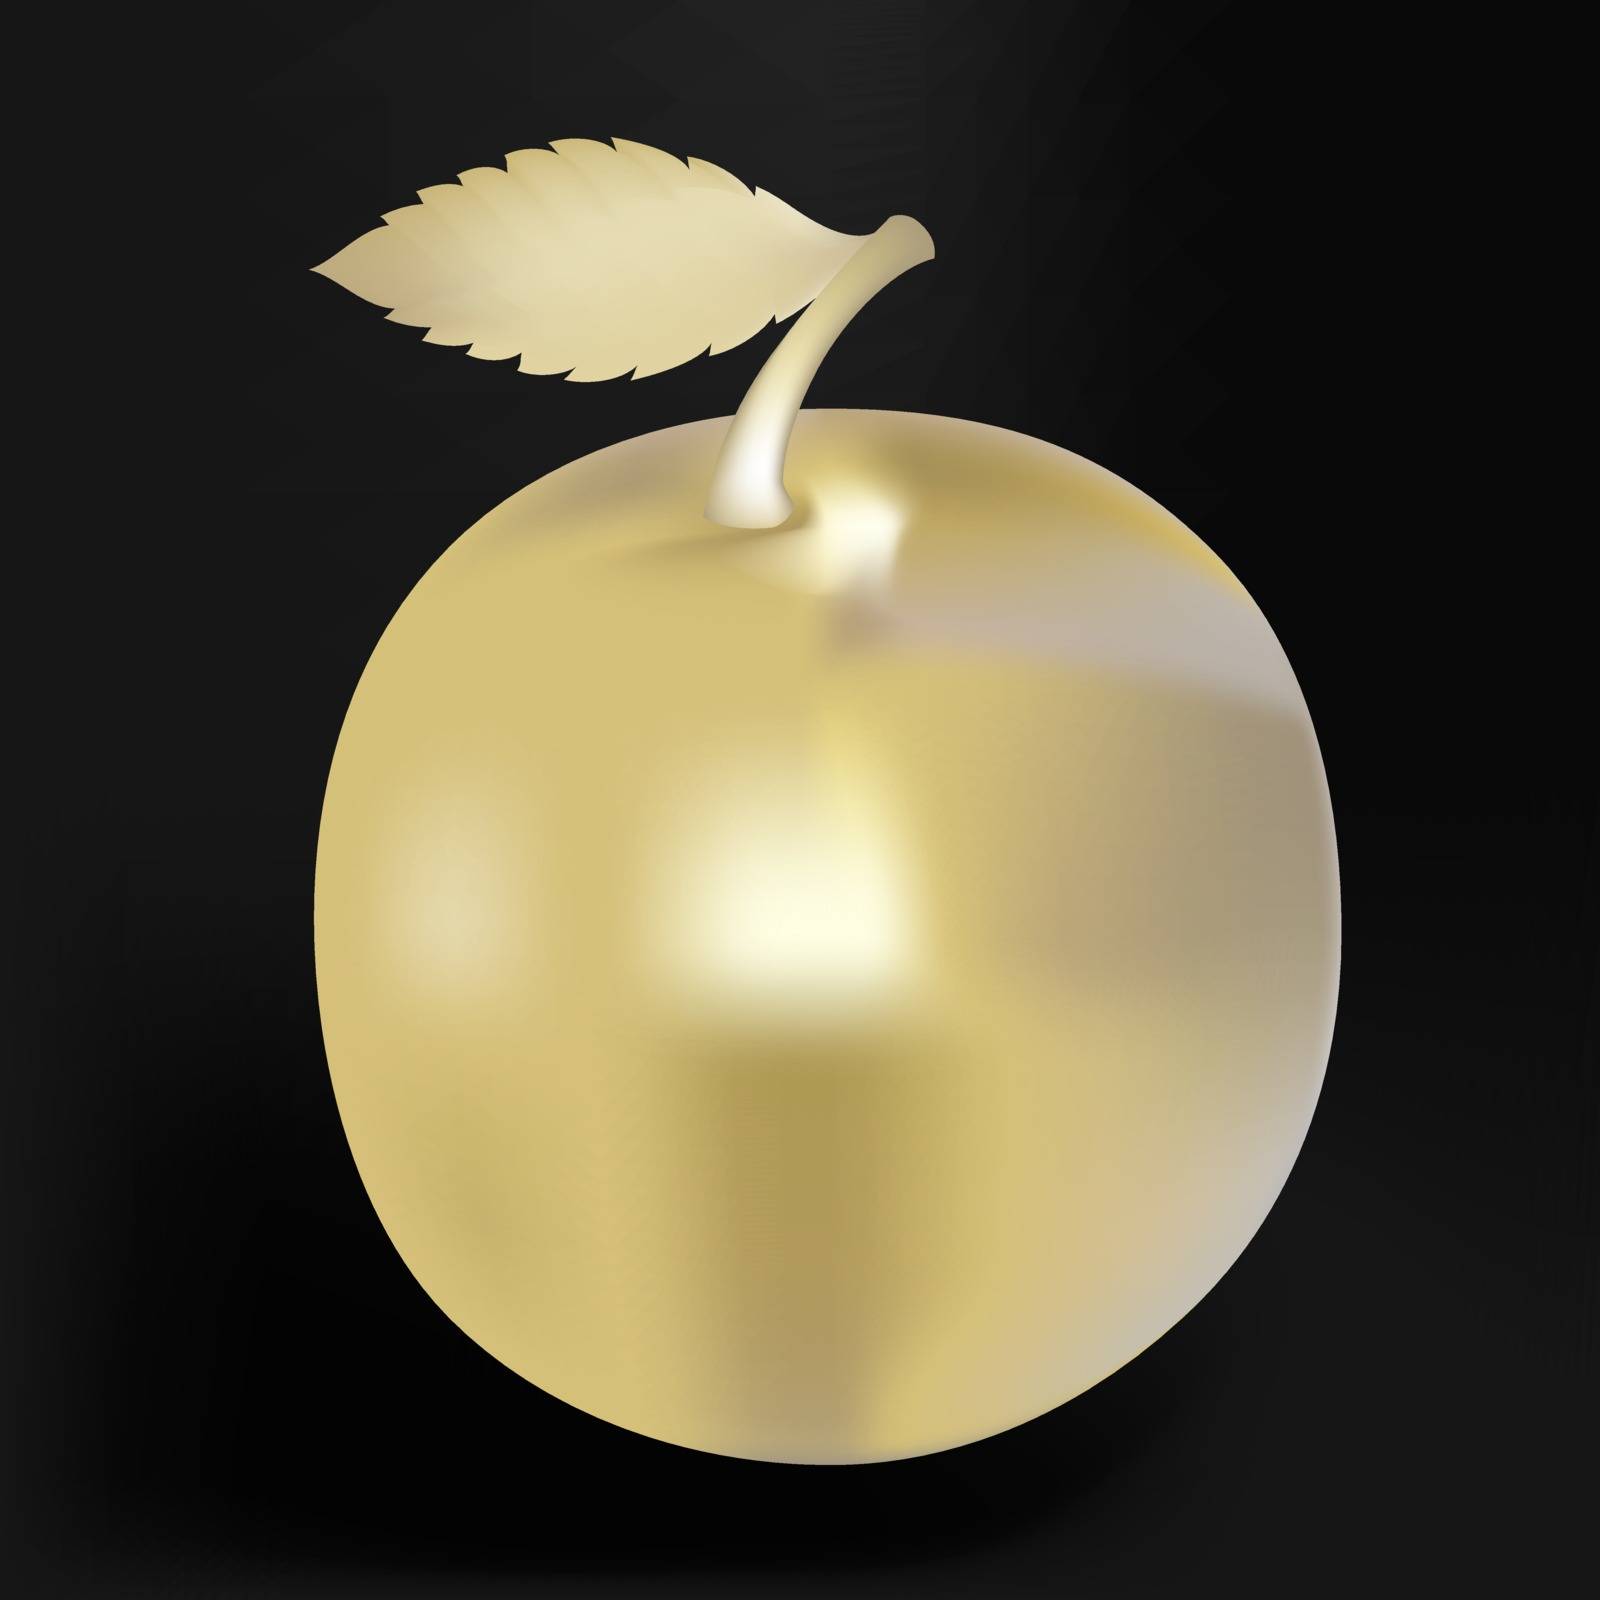 Vector illustration, in the form of golden apple